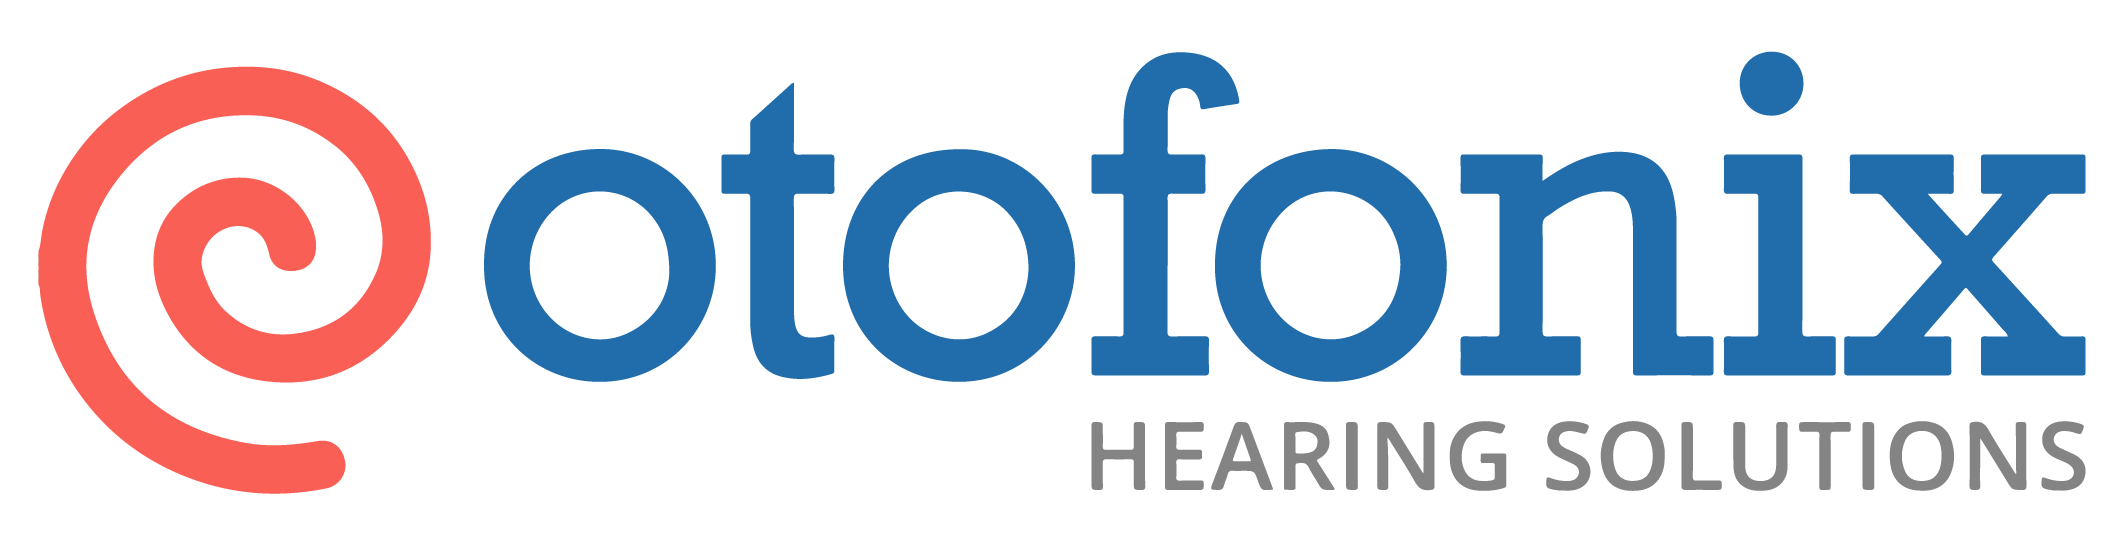 SAVE 15% On All Hearing Aids